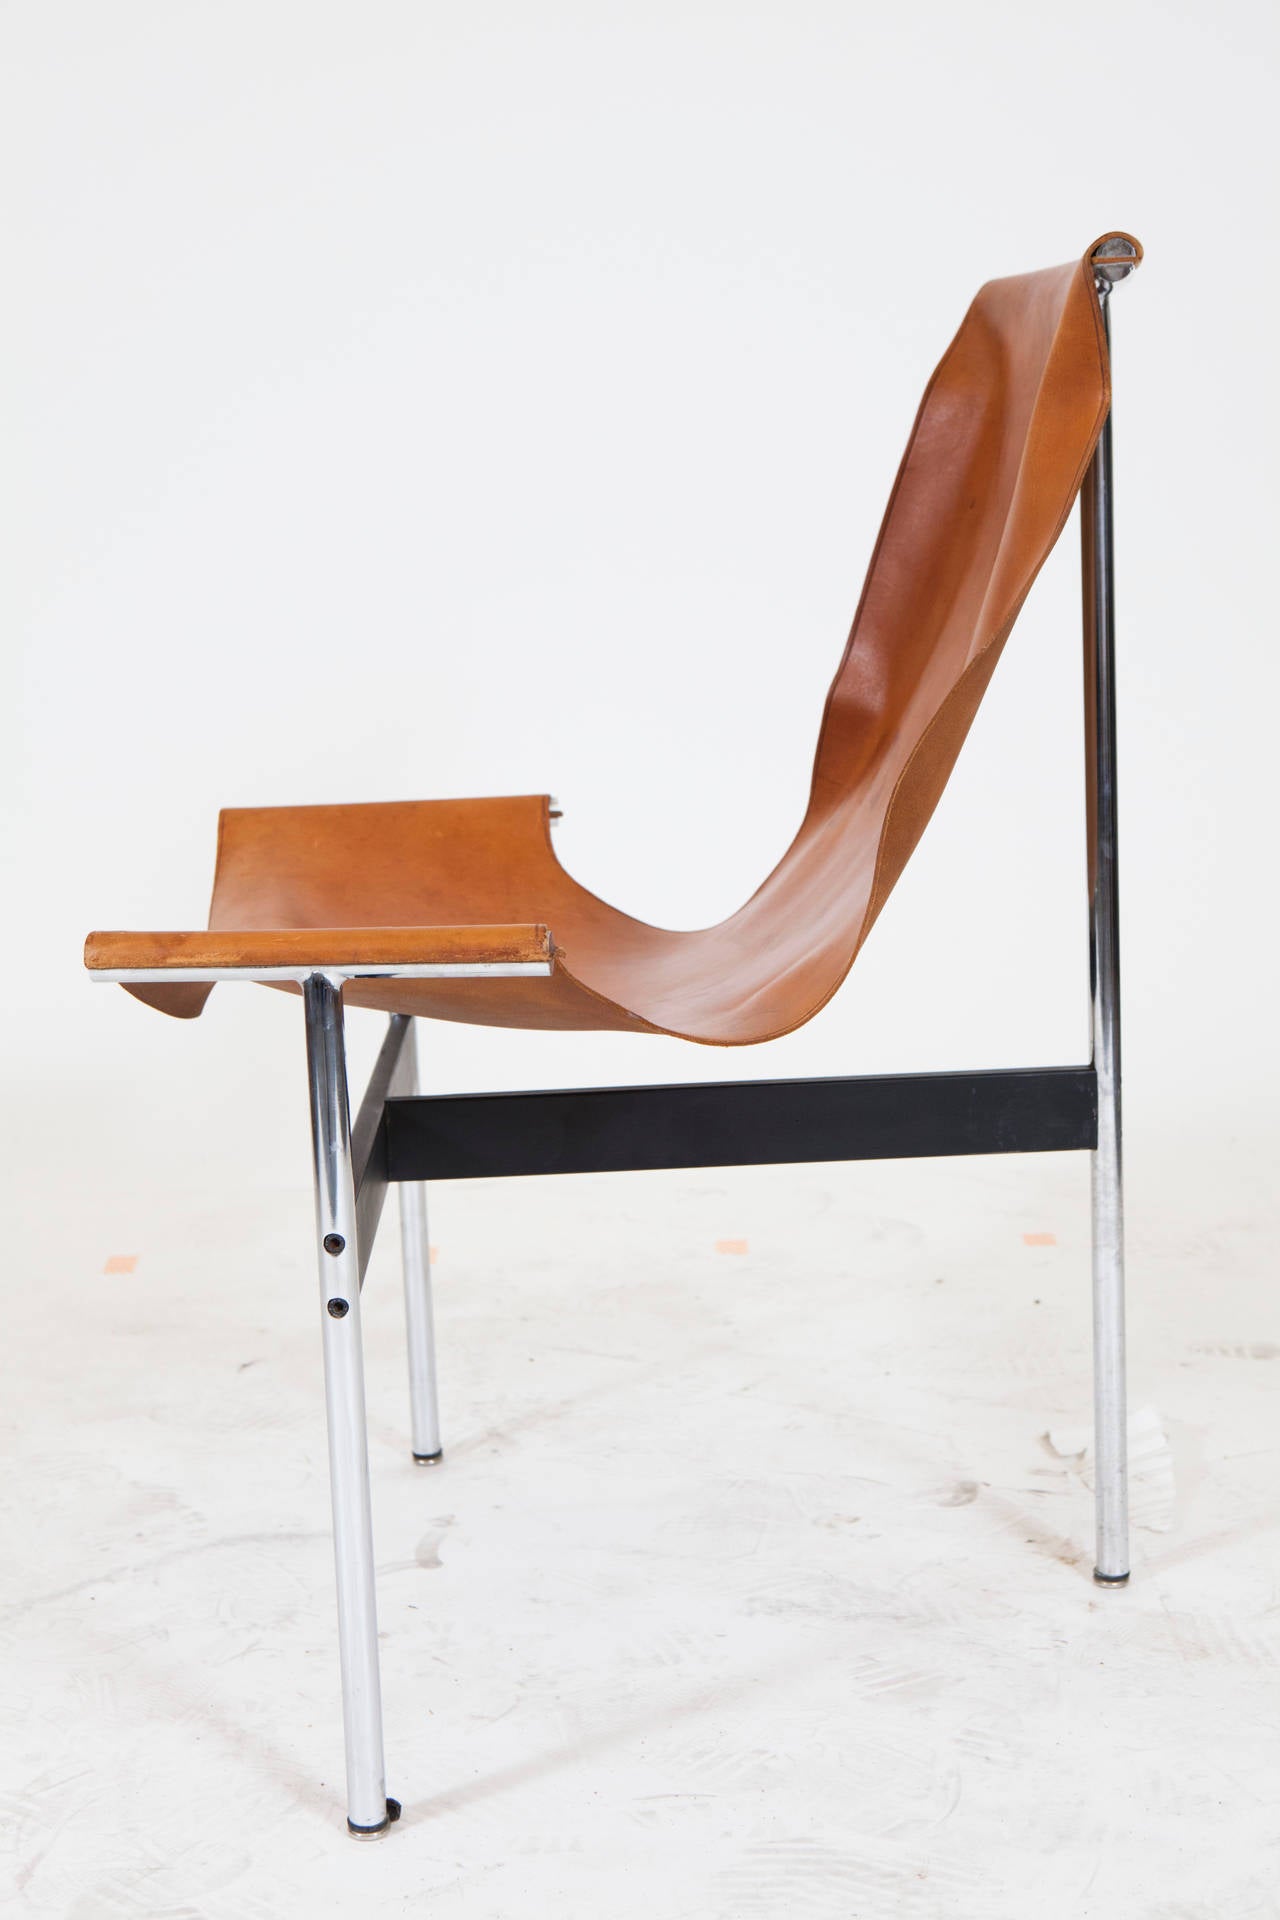 Designed by William Katavolos in 1953 the T-Chair gets its name for the 